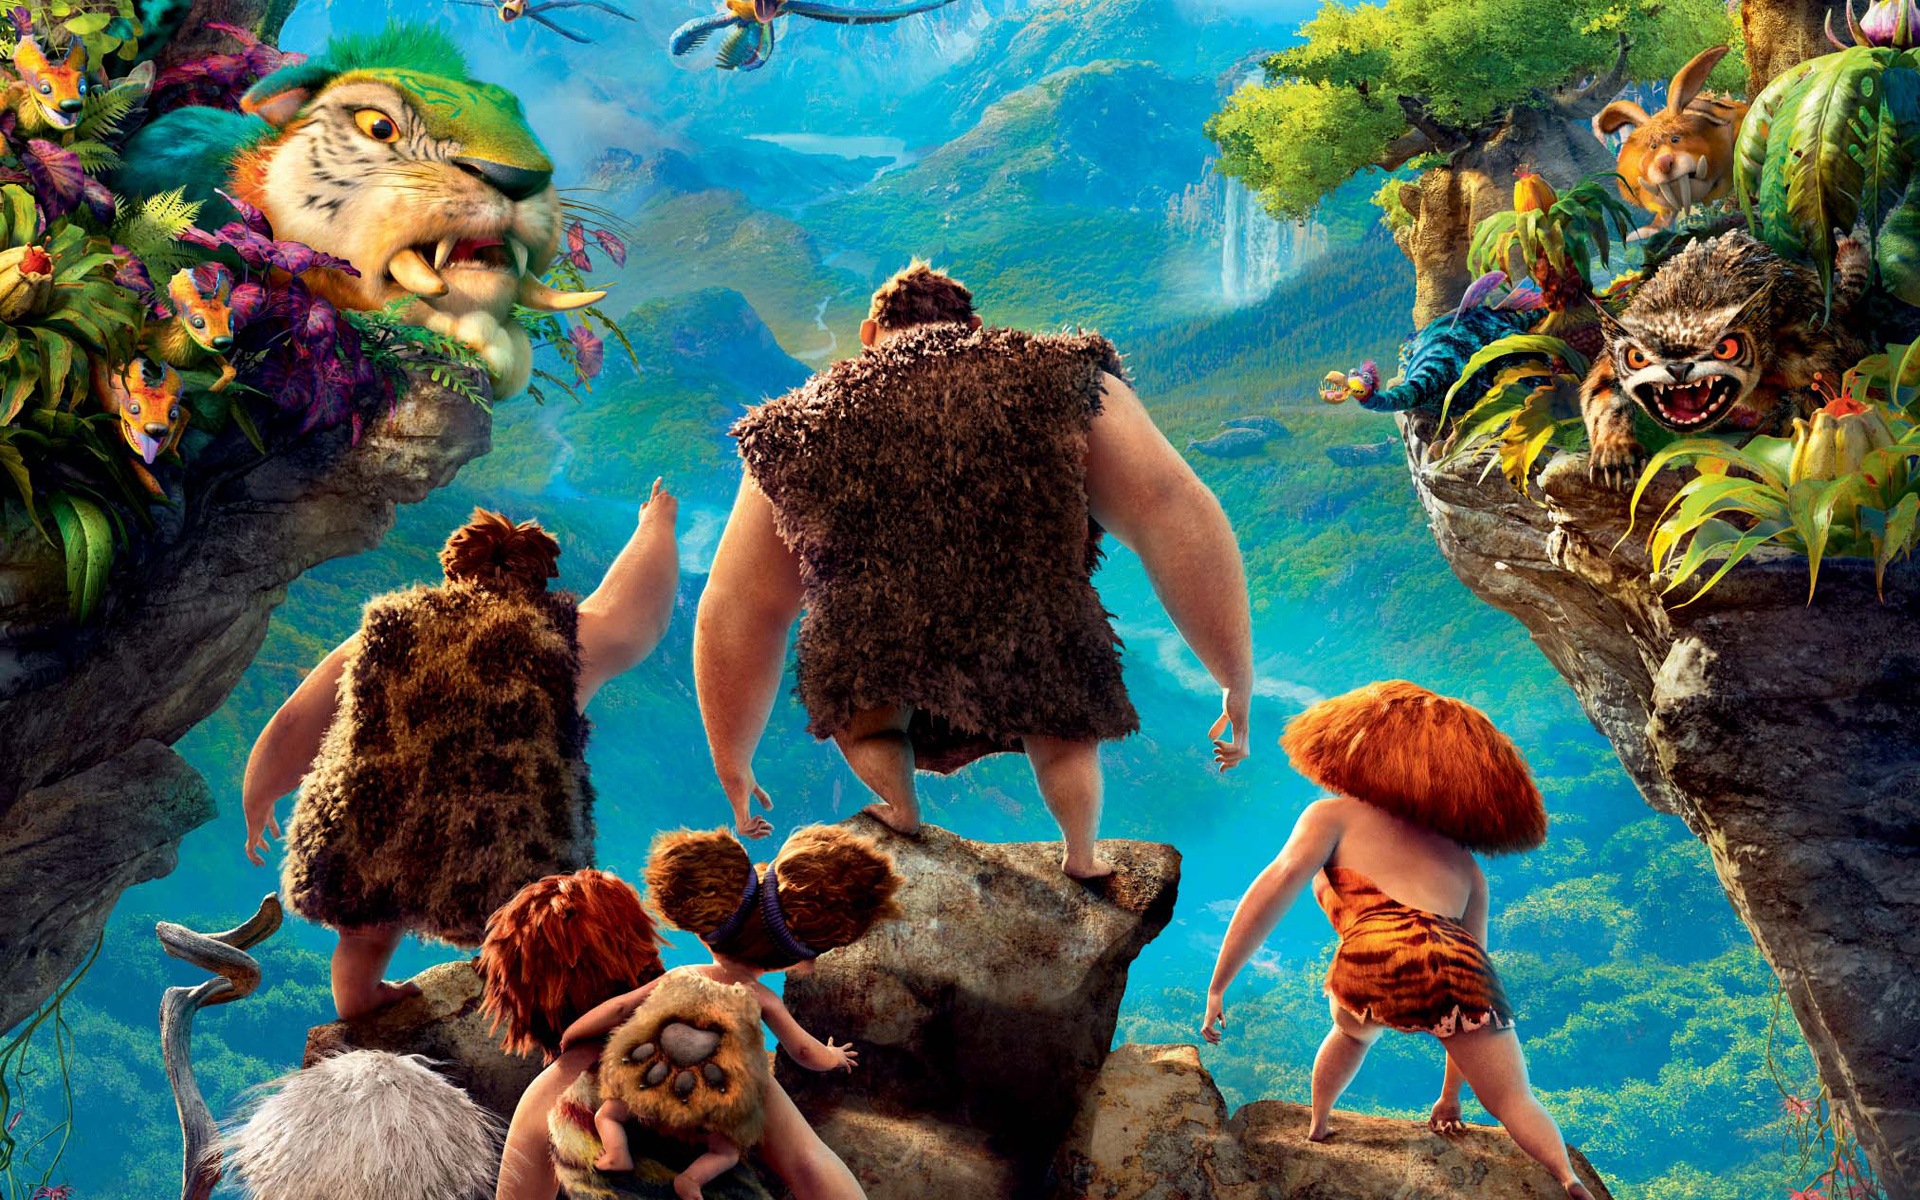 V Croods HD Movie Wallpapers #5 - 1920x1200